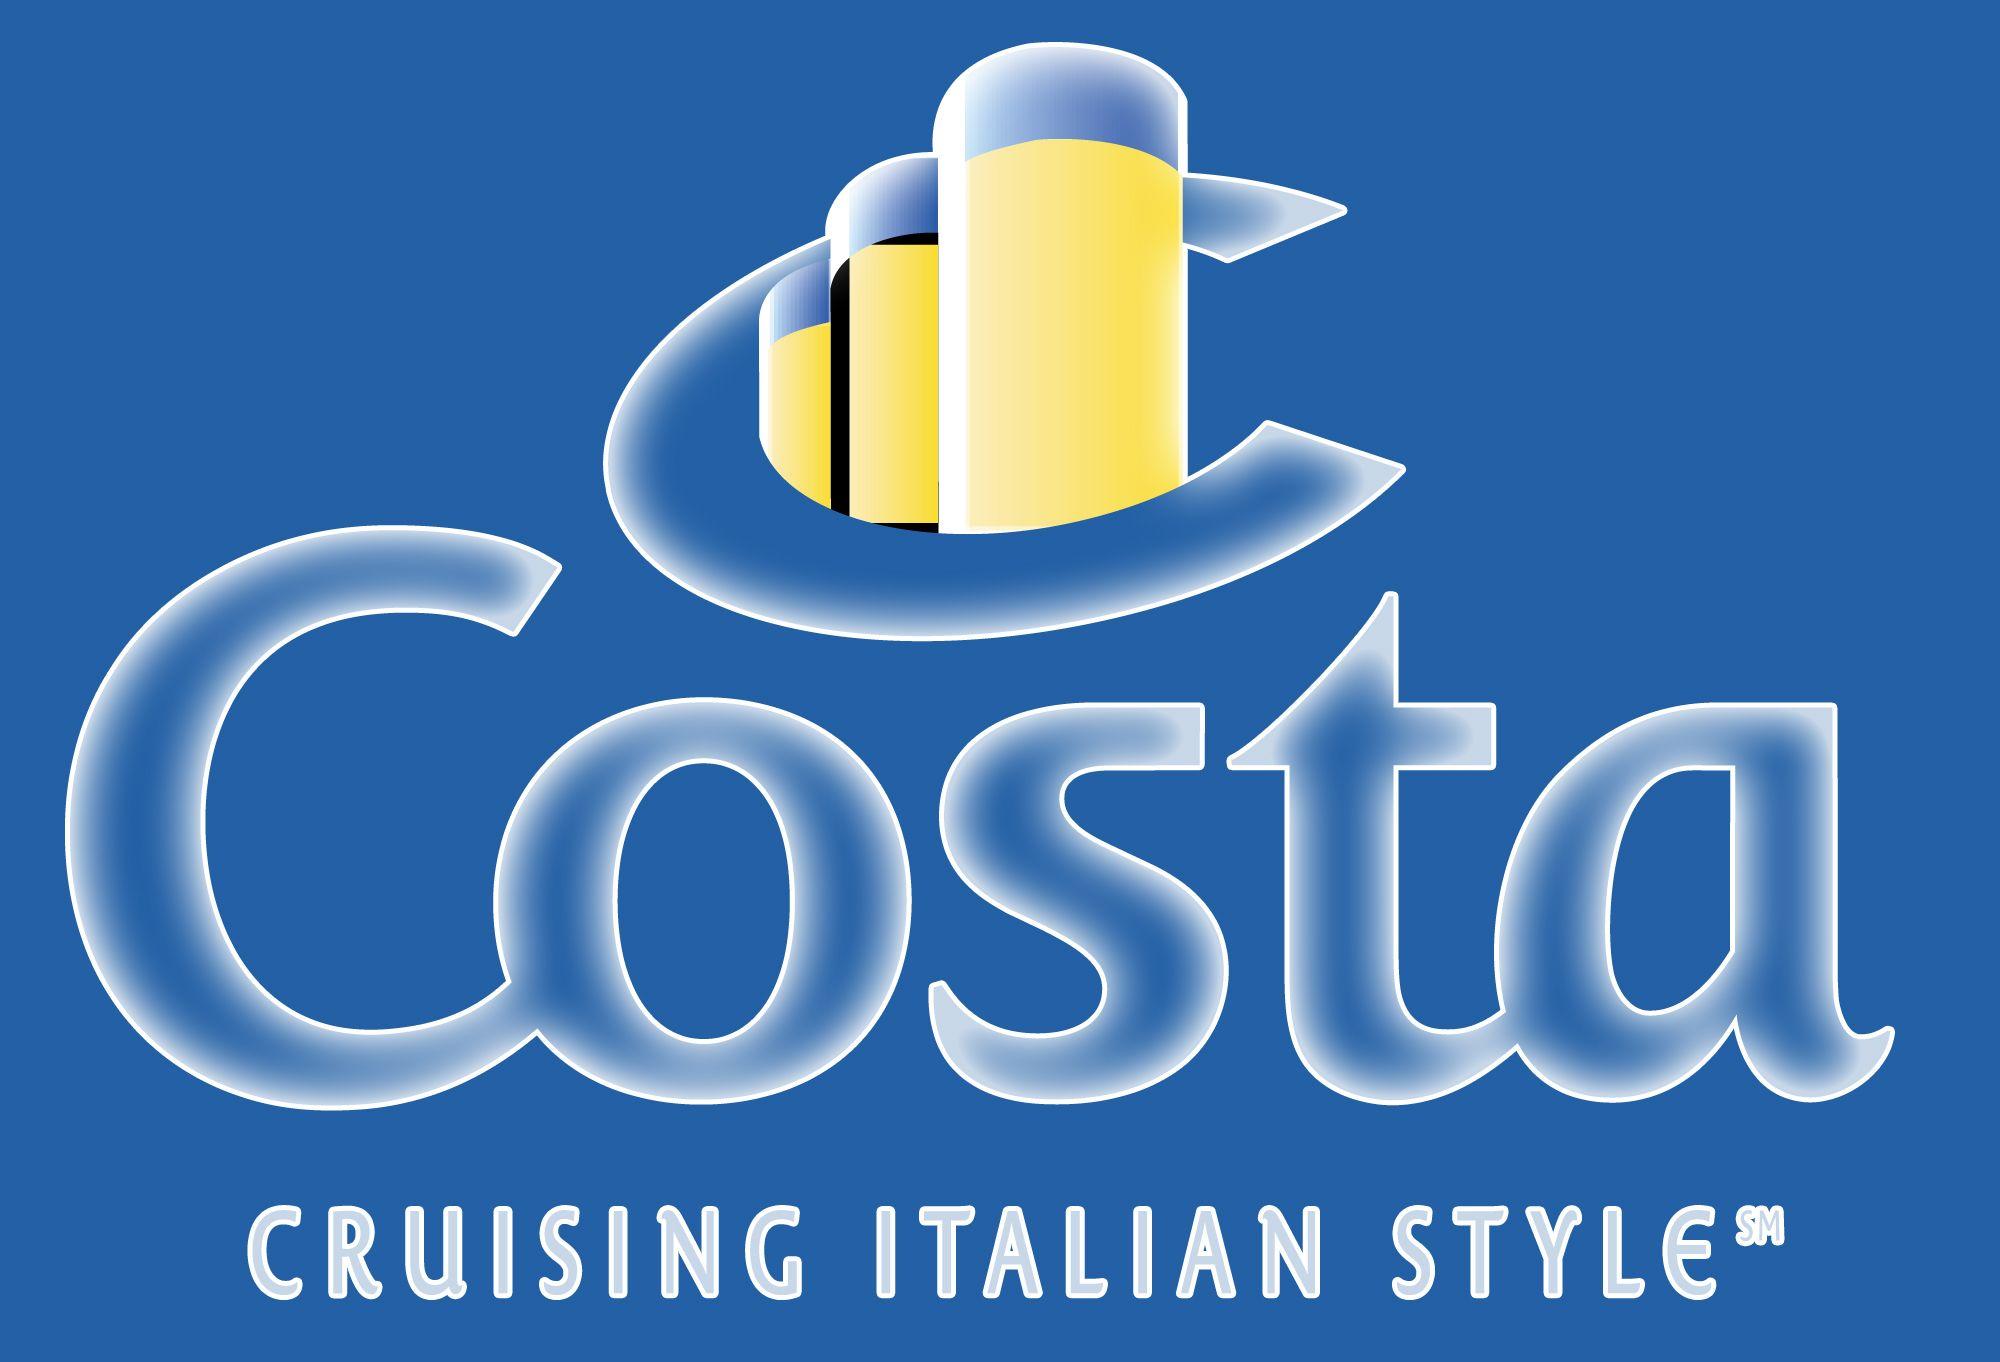 Costa Logo - Meaning Costa logo and symbol | history and evolution